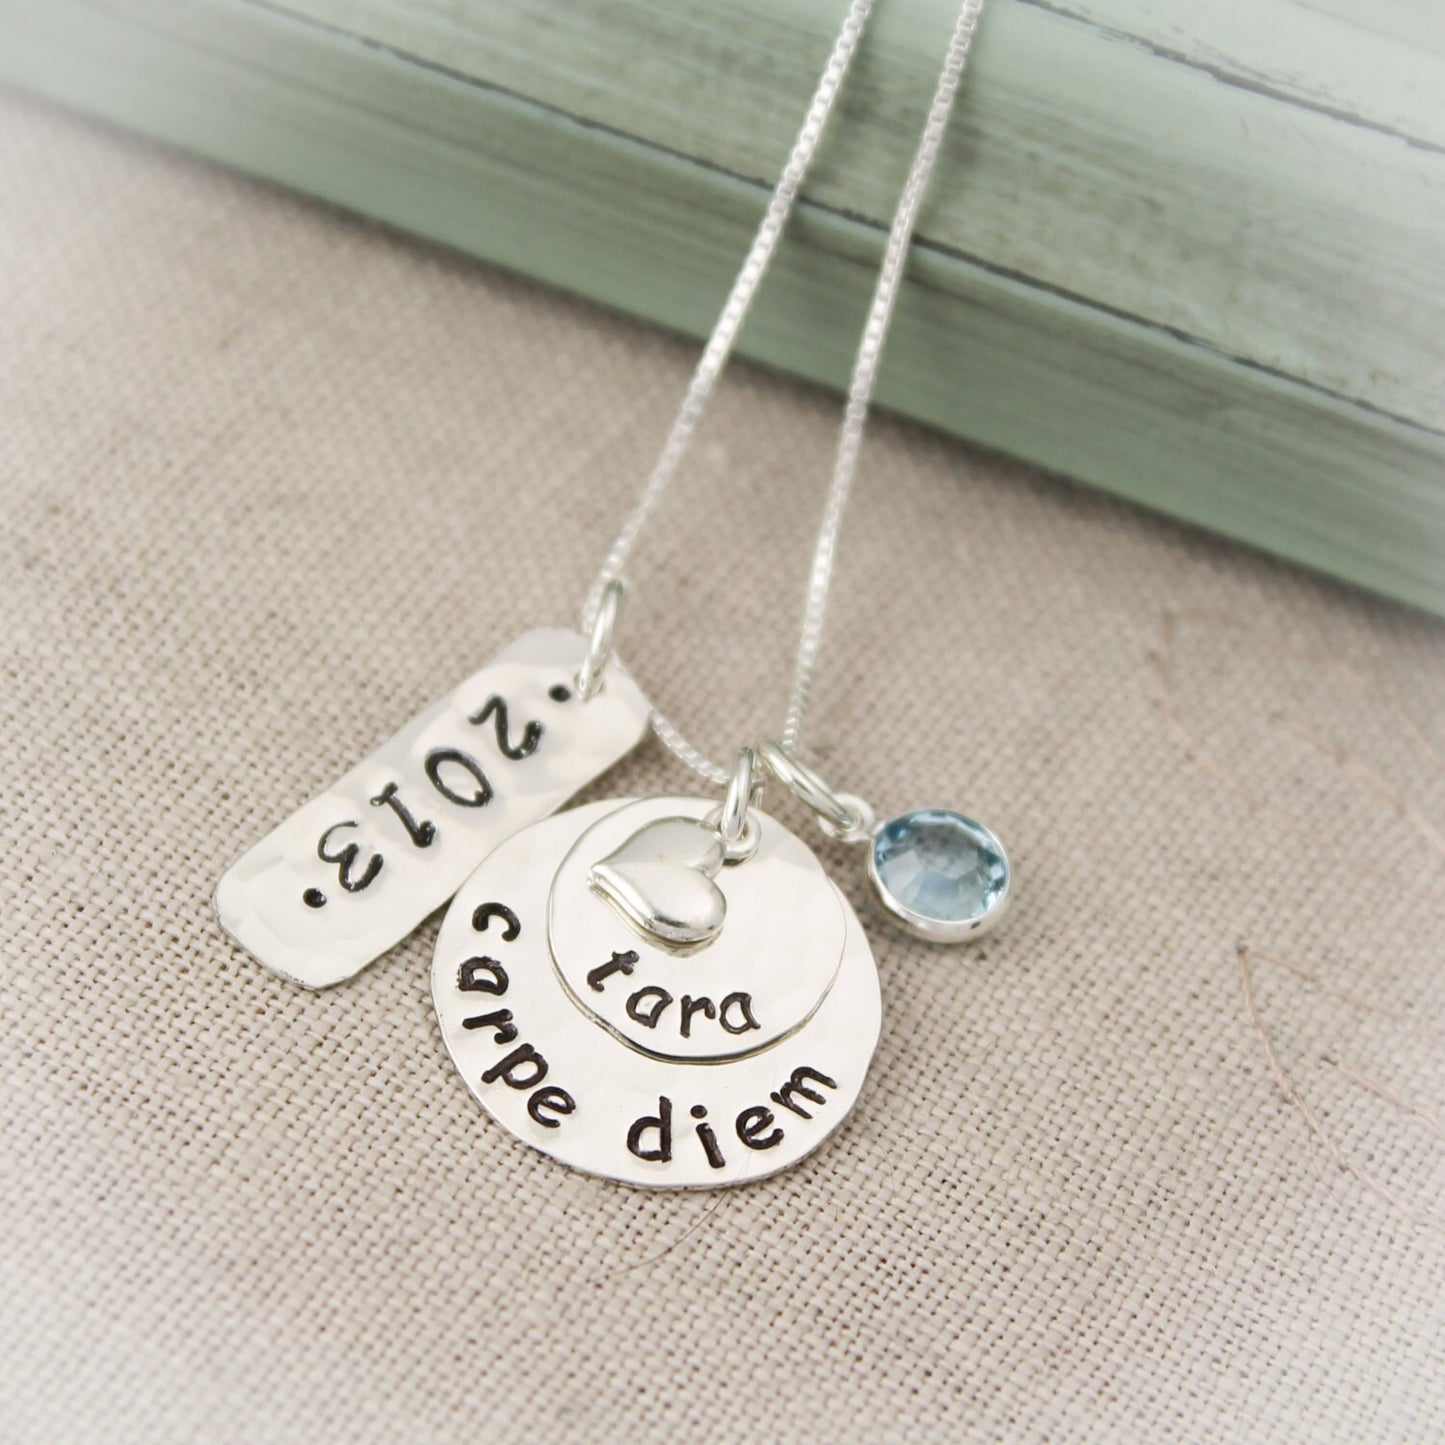 Personalized CARPE DIEM Necklace with Birthstone, Name and Date Graduation Gift Hand Stamped Jewelry